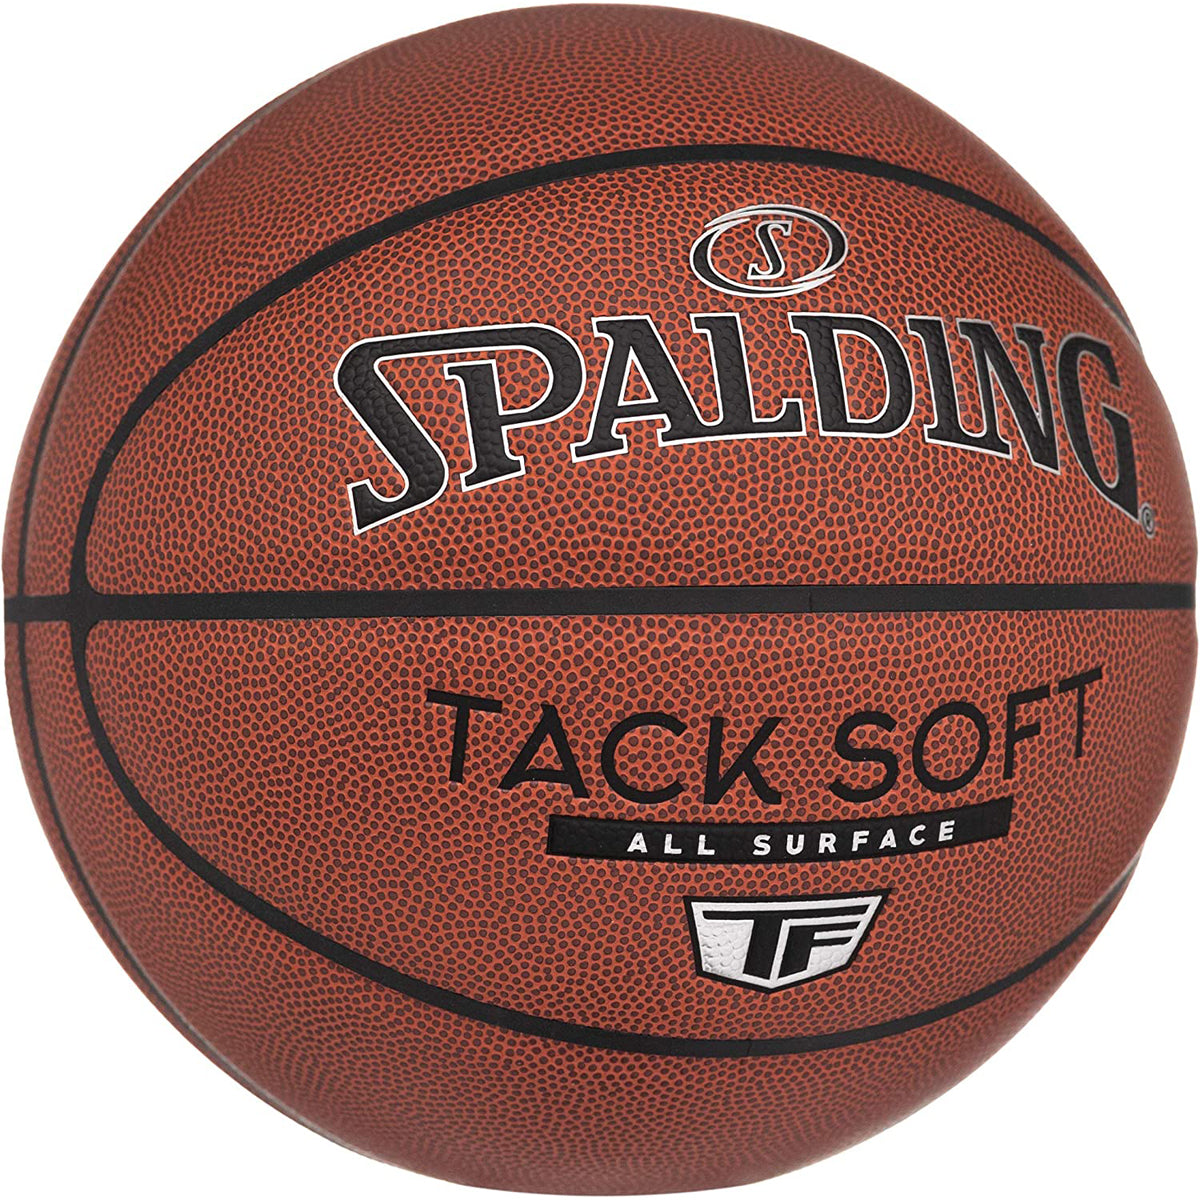 Spalding Tack-Soft TF Indoor/Outdoor Basketball – Forza Sports